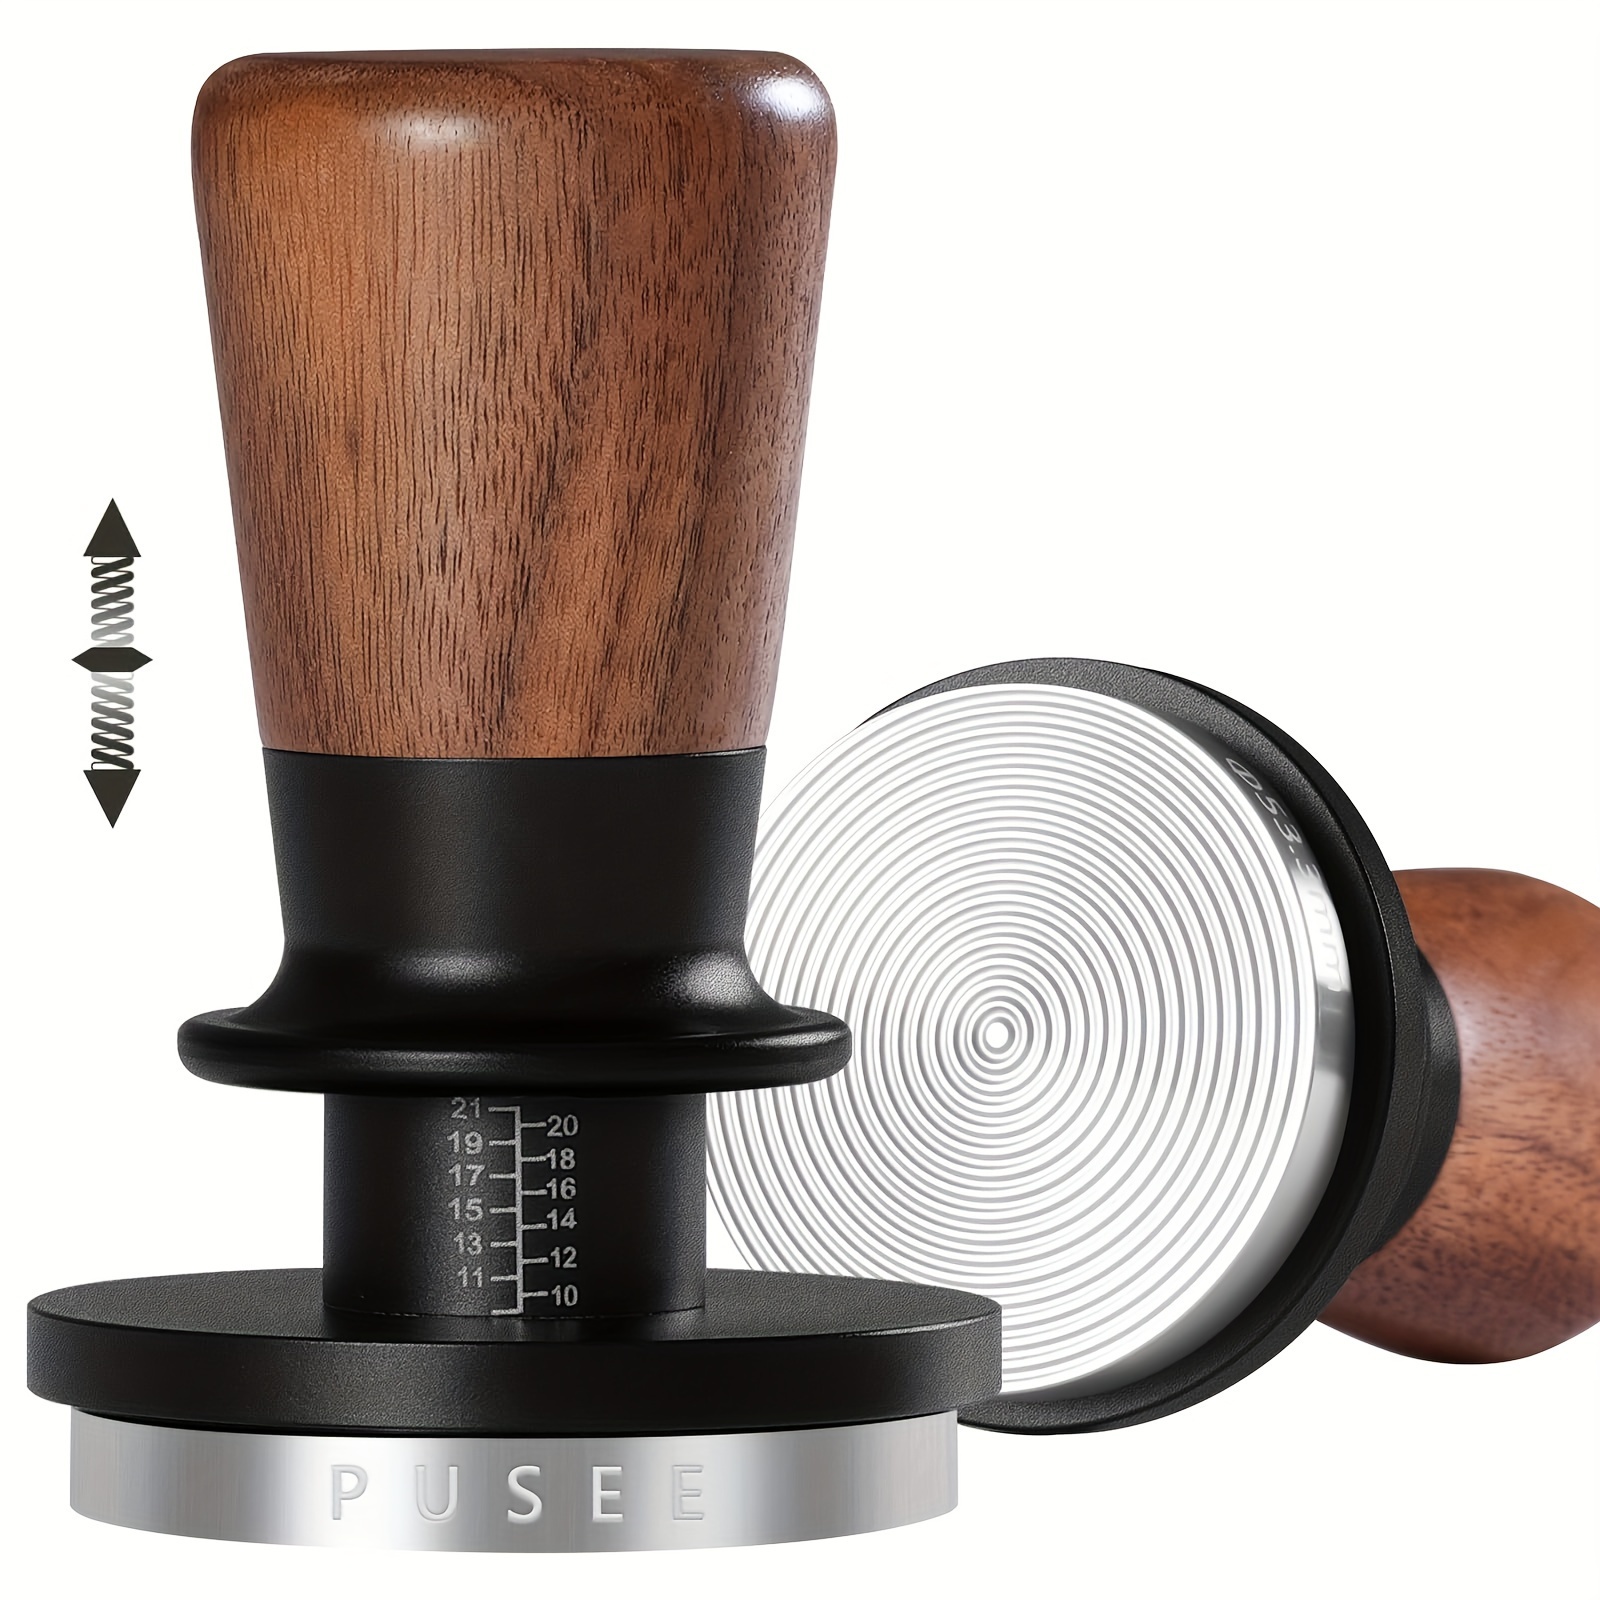 

Espresso Tamper, Calibrated Tamper With 30lbs Double Spring Loaded Tamper Walnut Wood Coffee Tamper For Barista Home, Stainless Steel Base Tamper Espresso Tool Fits 51/54/58mm Portafilters